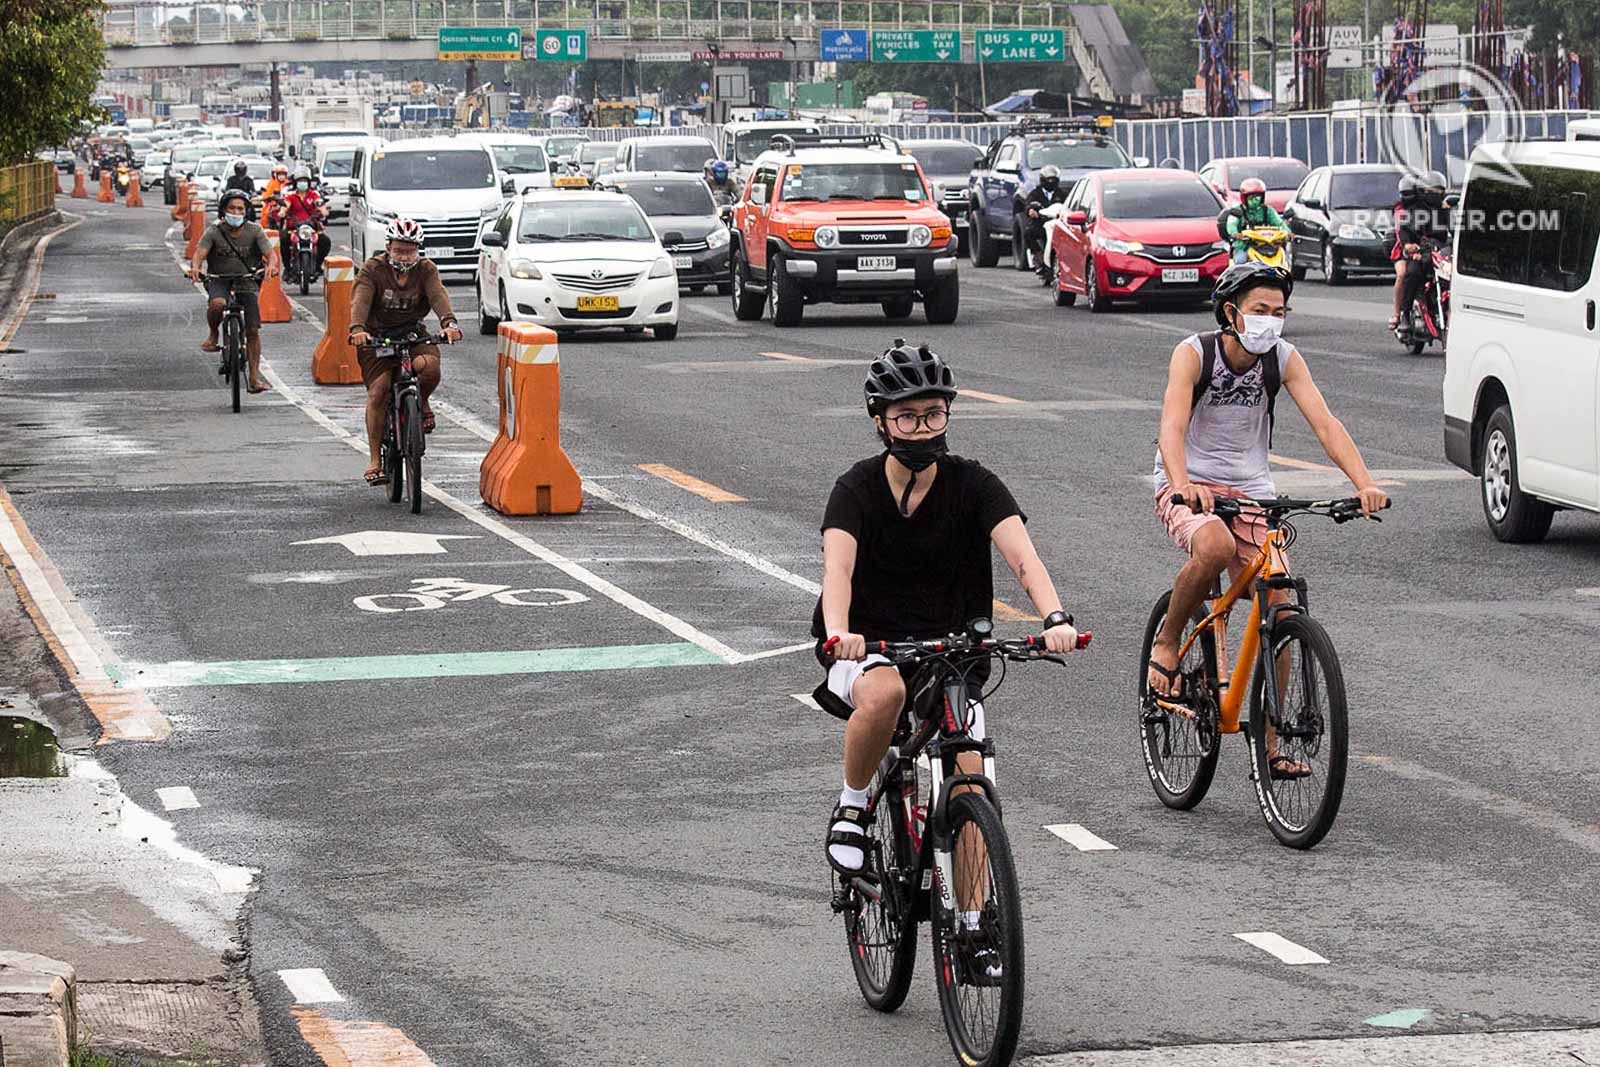 More bike owners than car owners in PH – SWS